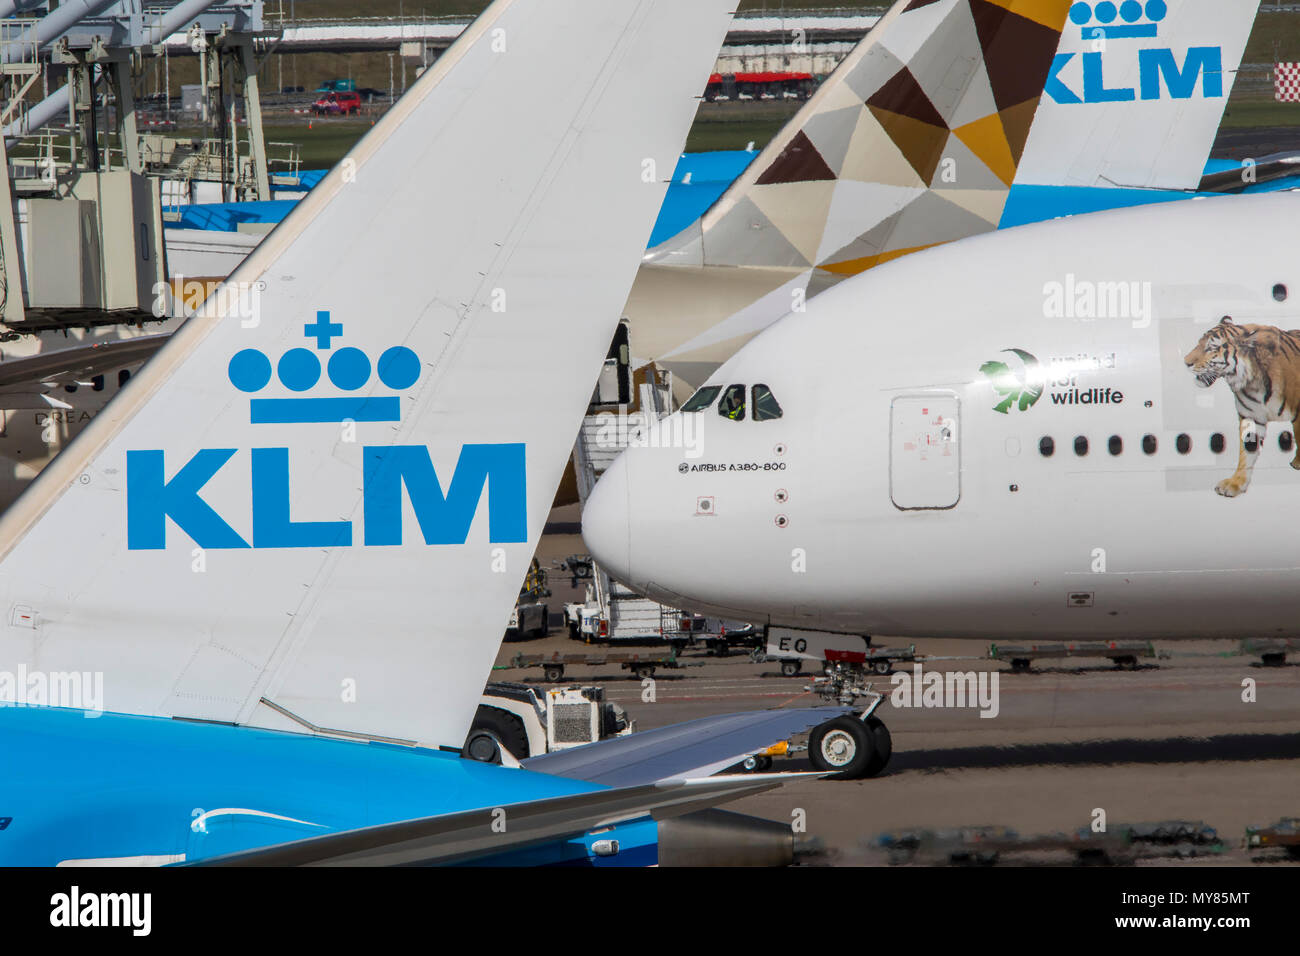 Emirates Airbus A 380-861, United for Wildlife Design, at Amsterdam Schiphol Airport, in North Holland, Netherlands, KLM Planes, Stock Photo